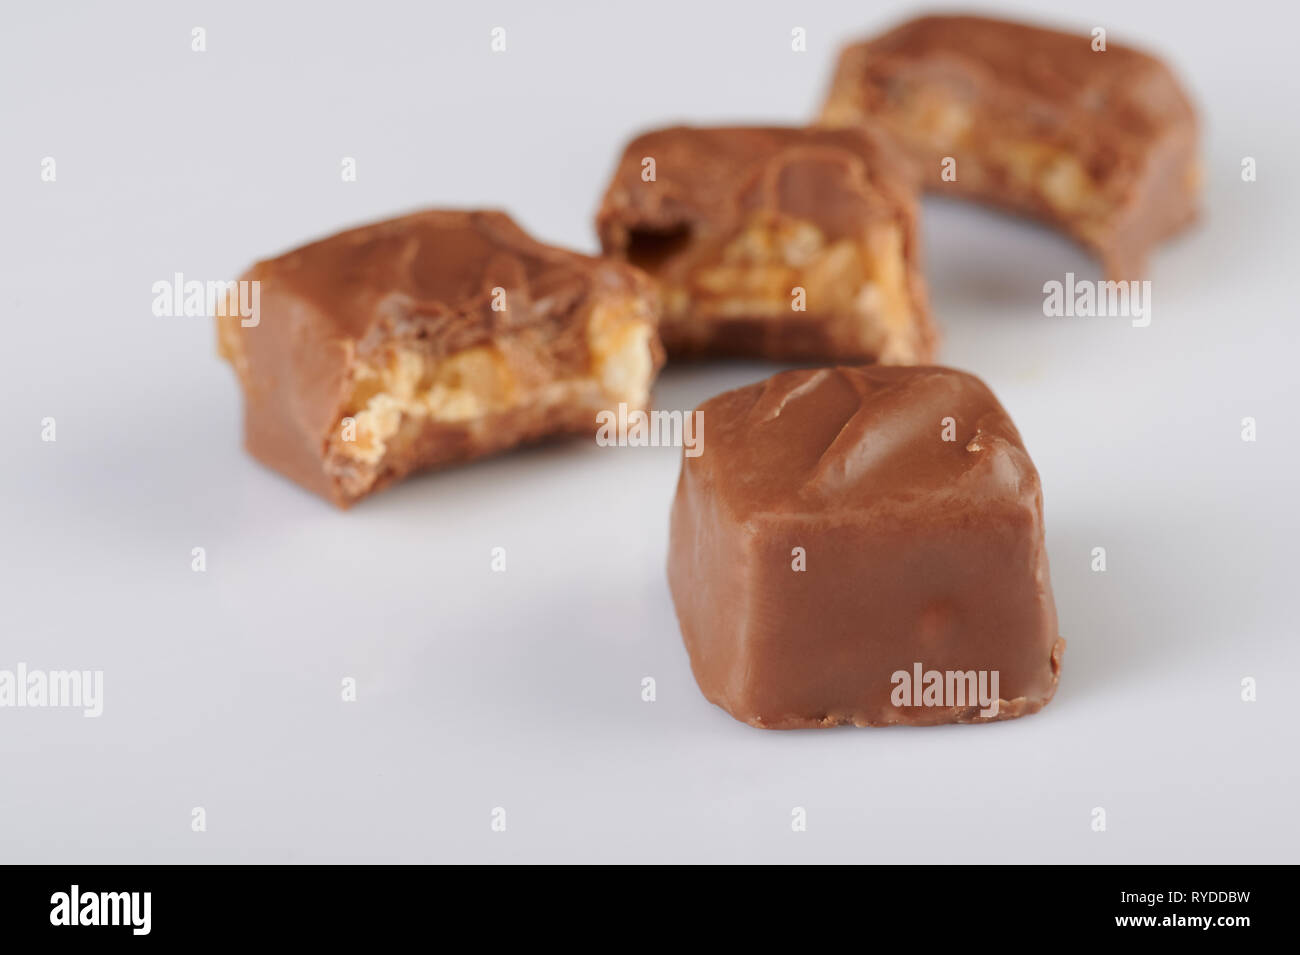 Chocolate candy bar on bited bars background Stock Photo